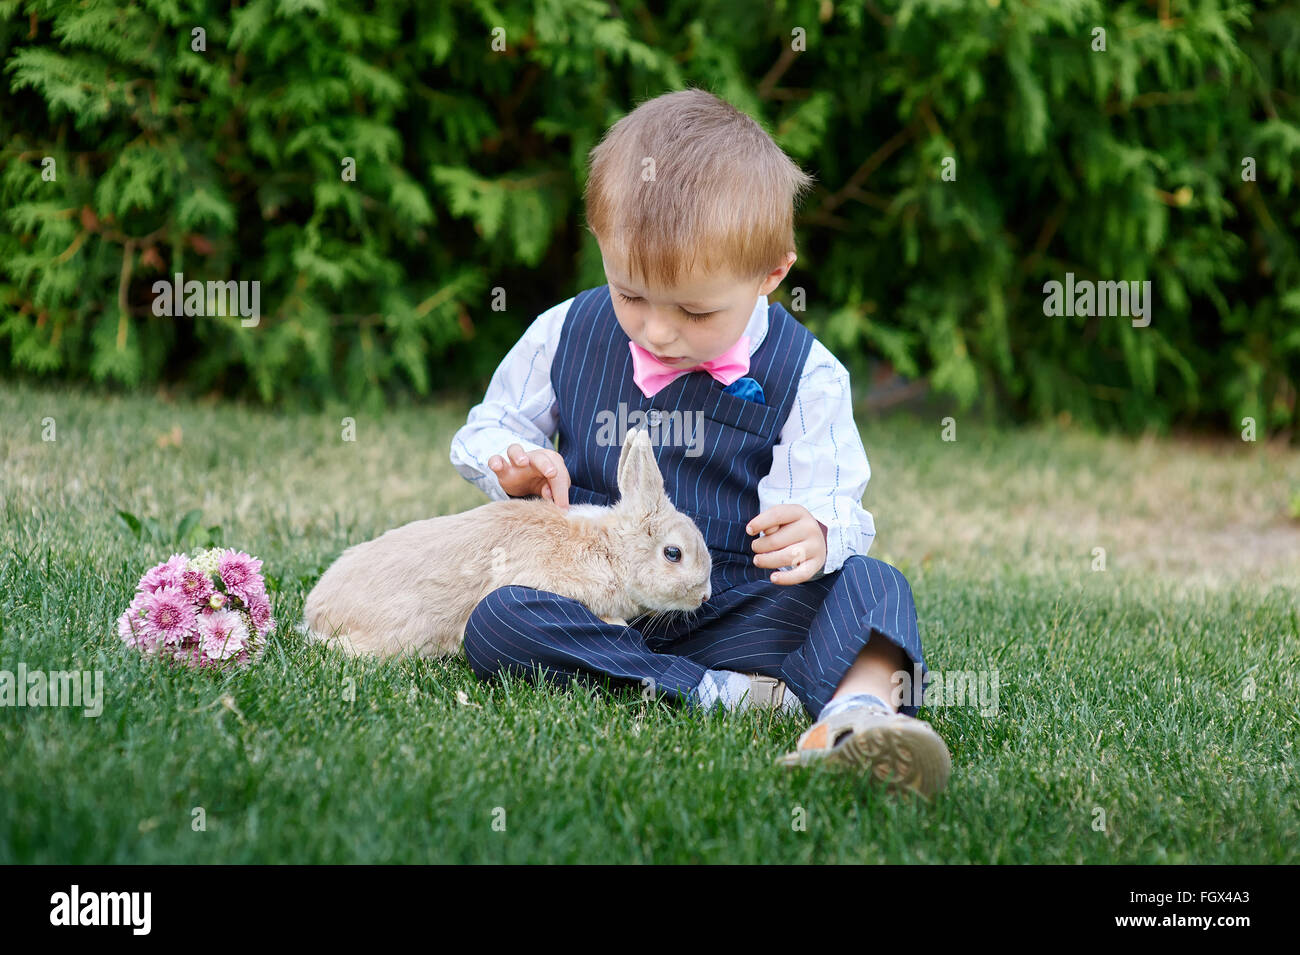 little boy in a suit playing with a rabbit on the grass Stock Photo